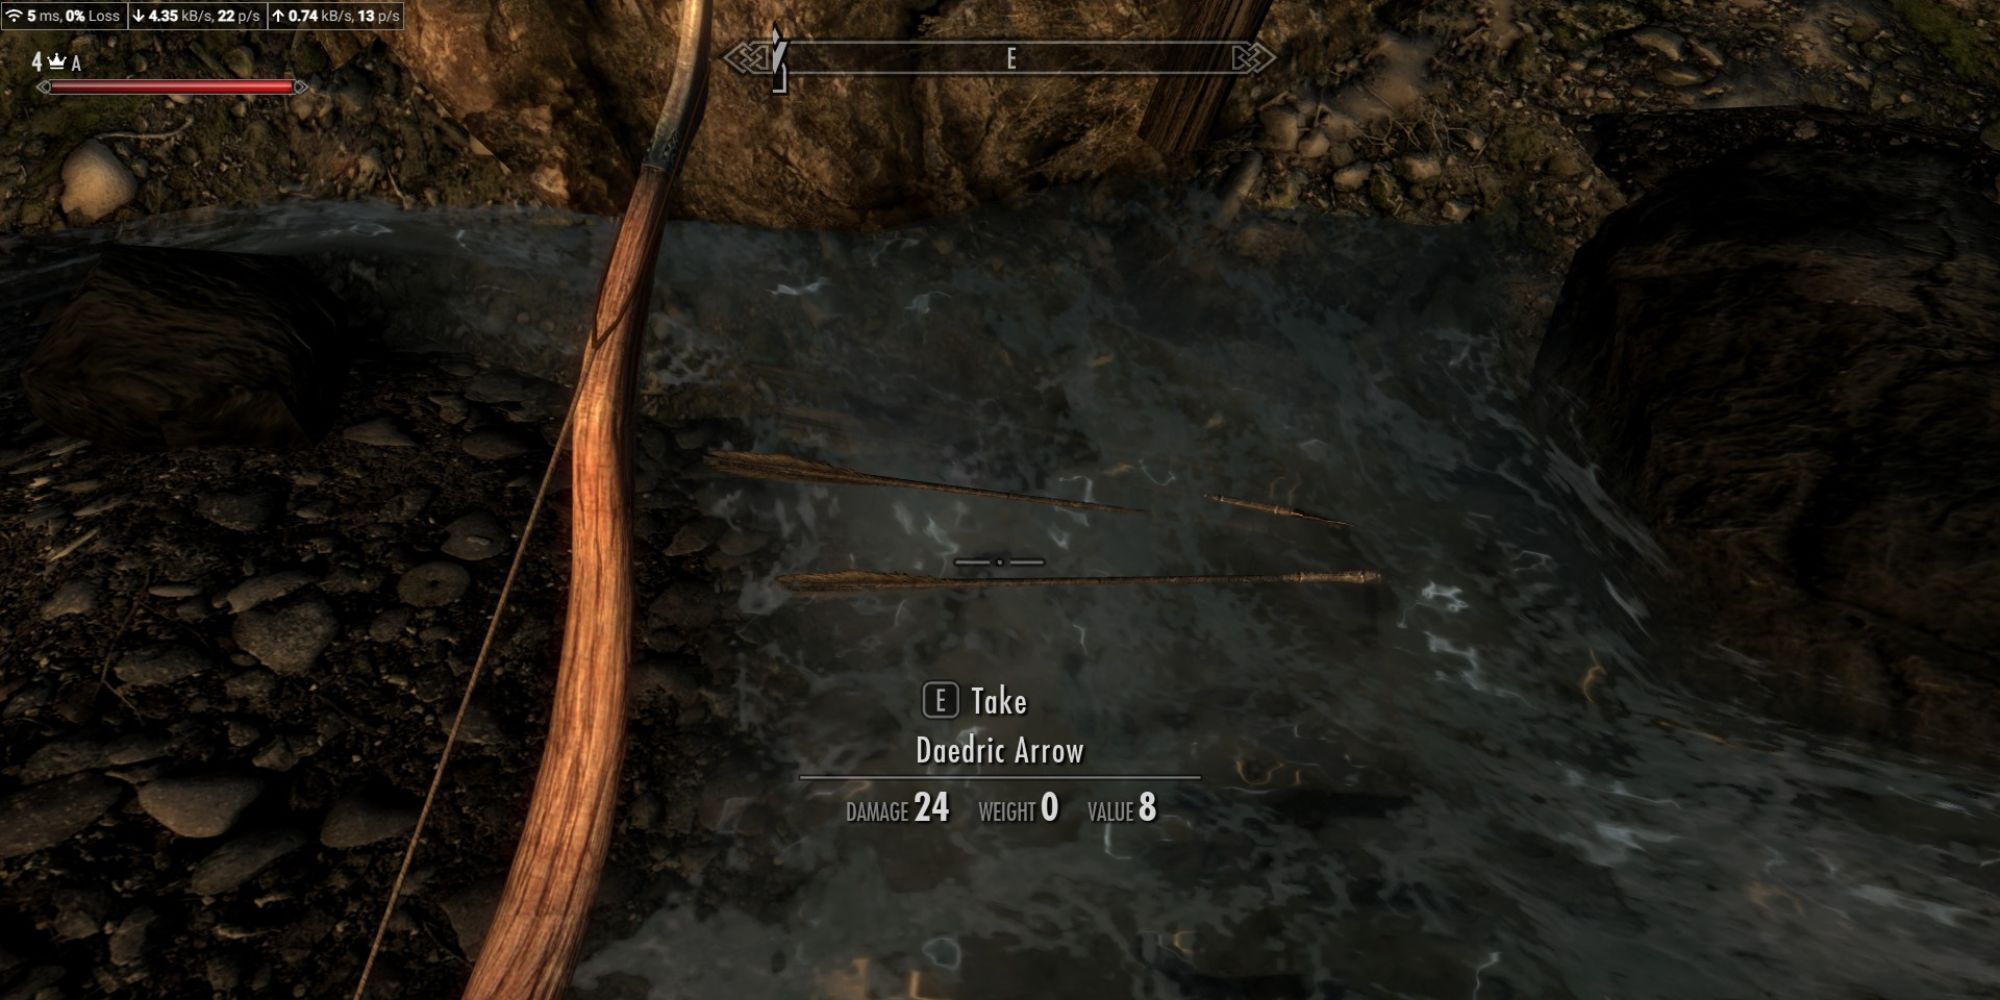 Player looks at two daedric arrows dropped by party member